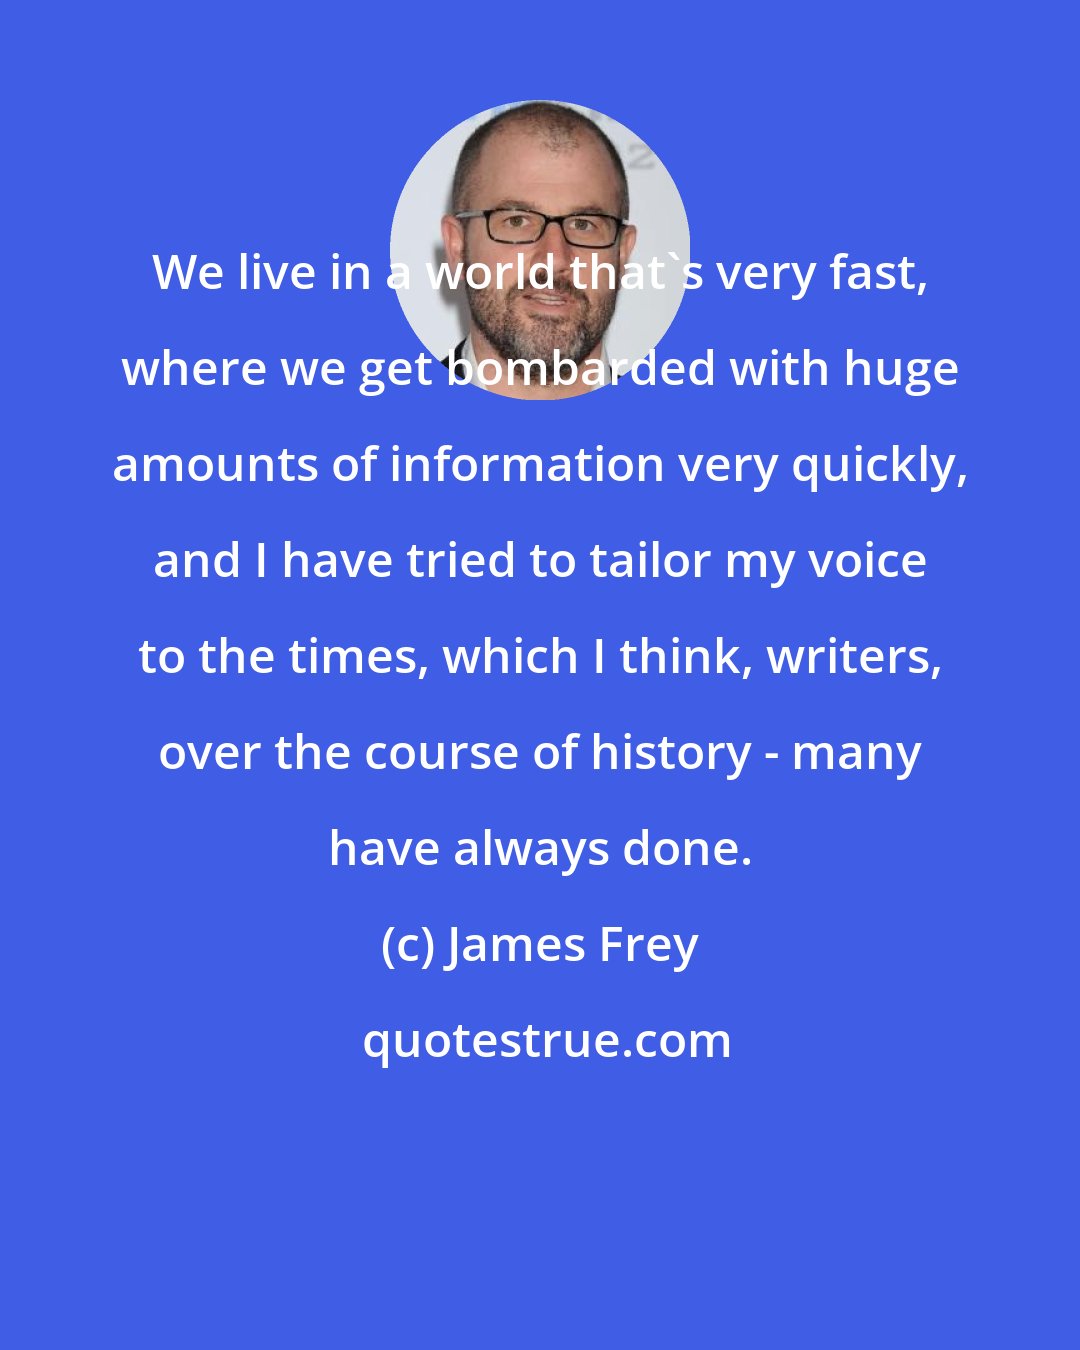 James Frey: We live in a world that's very fast, where we get bombarded with huge amounts of information very quickly, and I have tried to tailor my voice to the times, which I think, writers, over the course of history - many have always done.